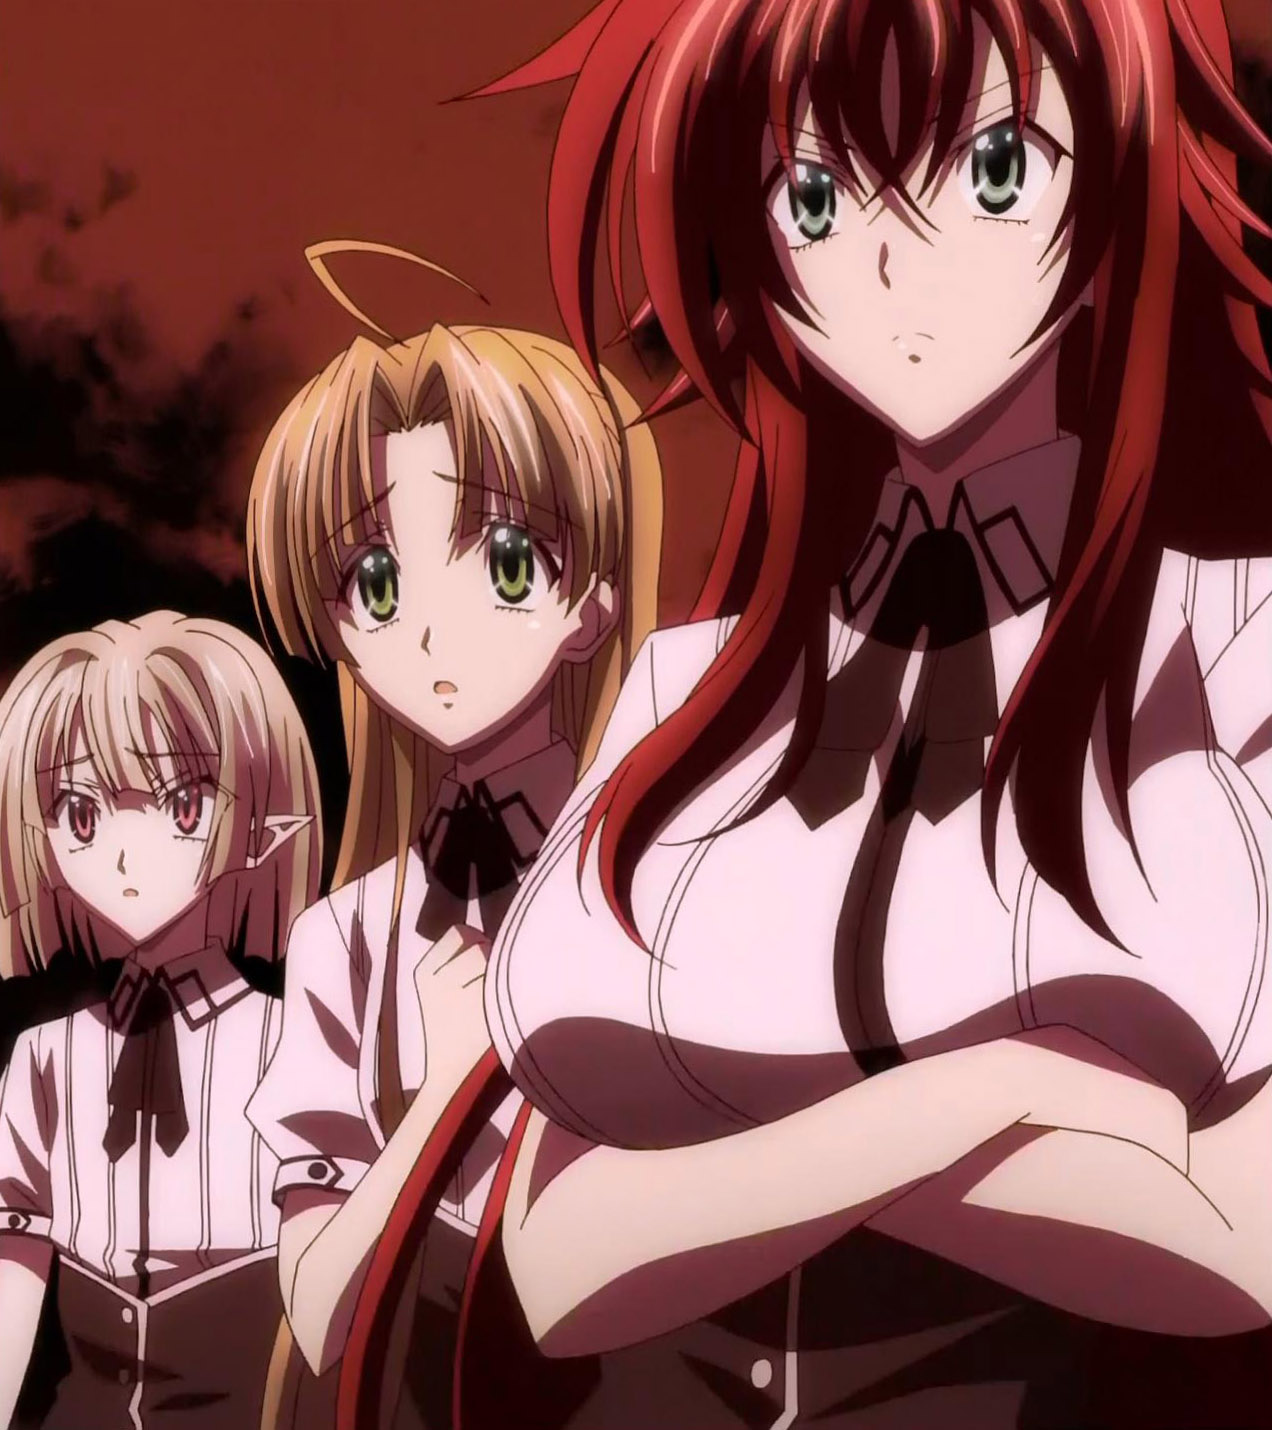 12 High School Dxd Guys Related Keywords & Suggestions - 12 